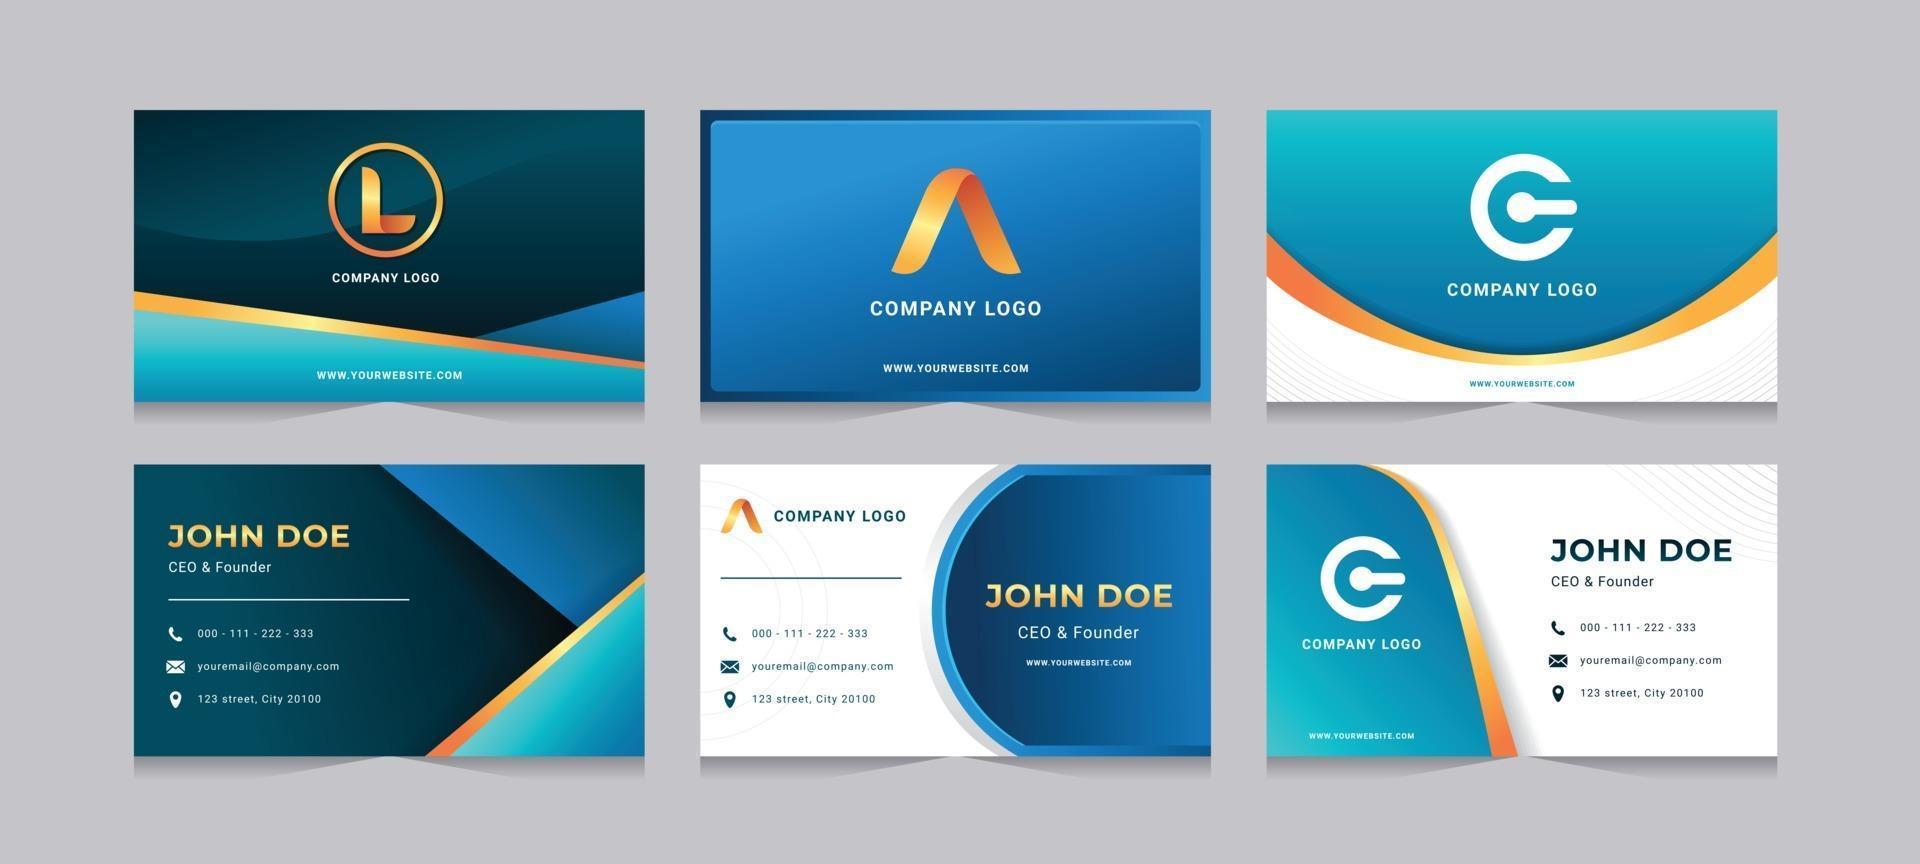 Blue and Gold Business Card Template vector